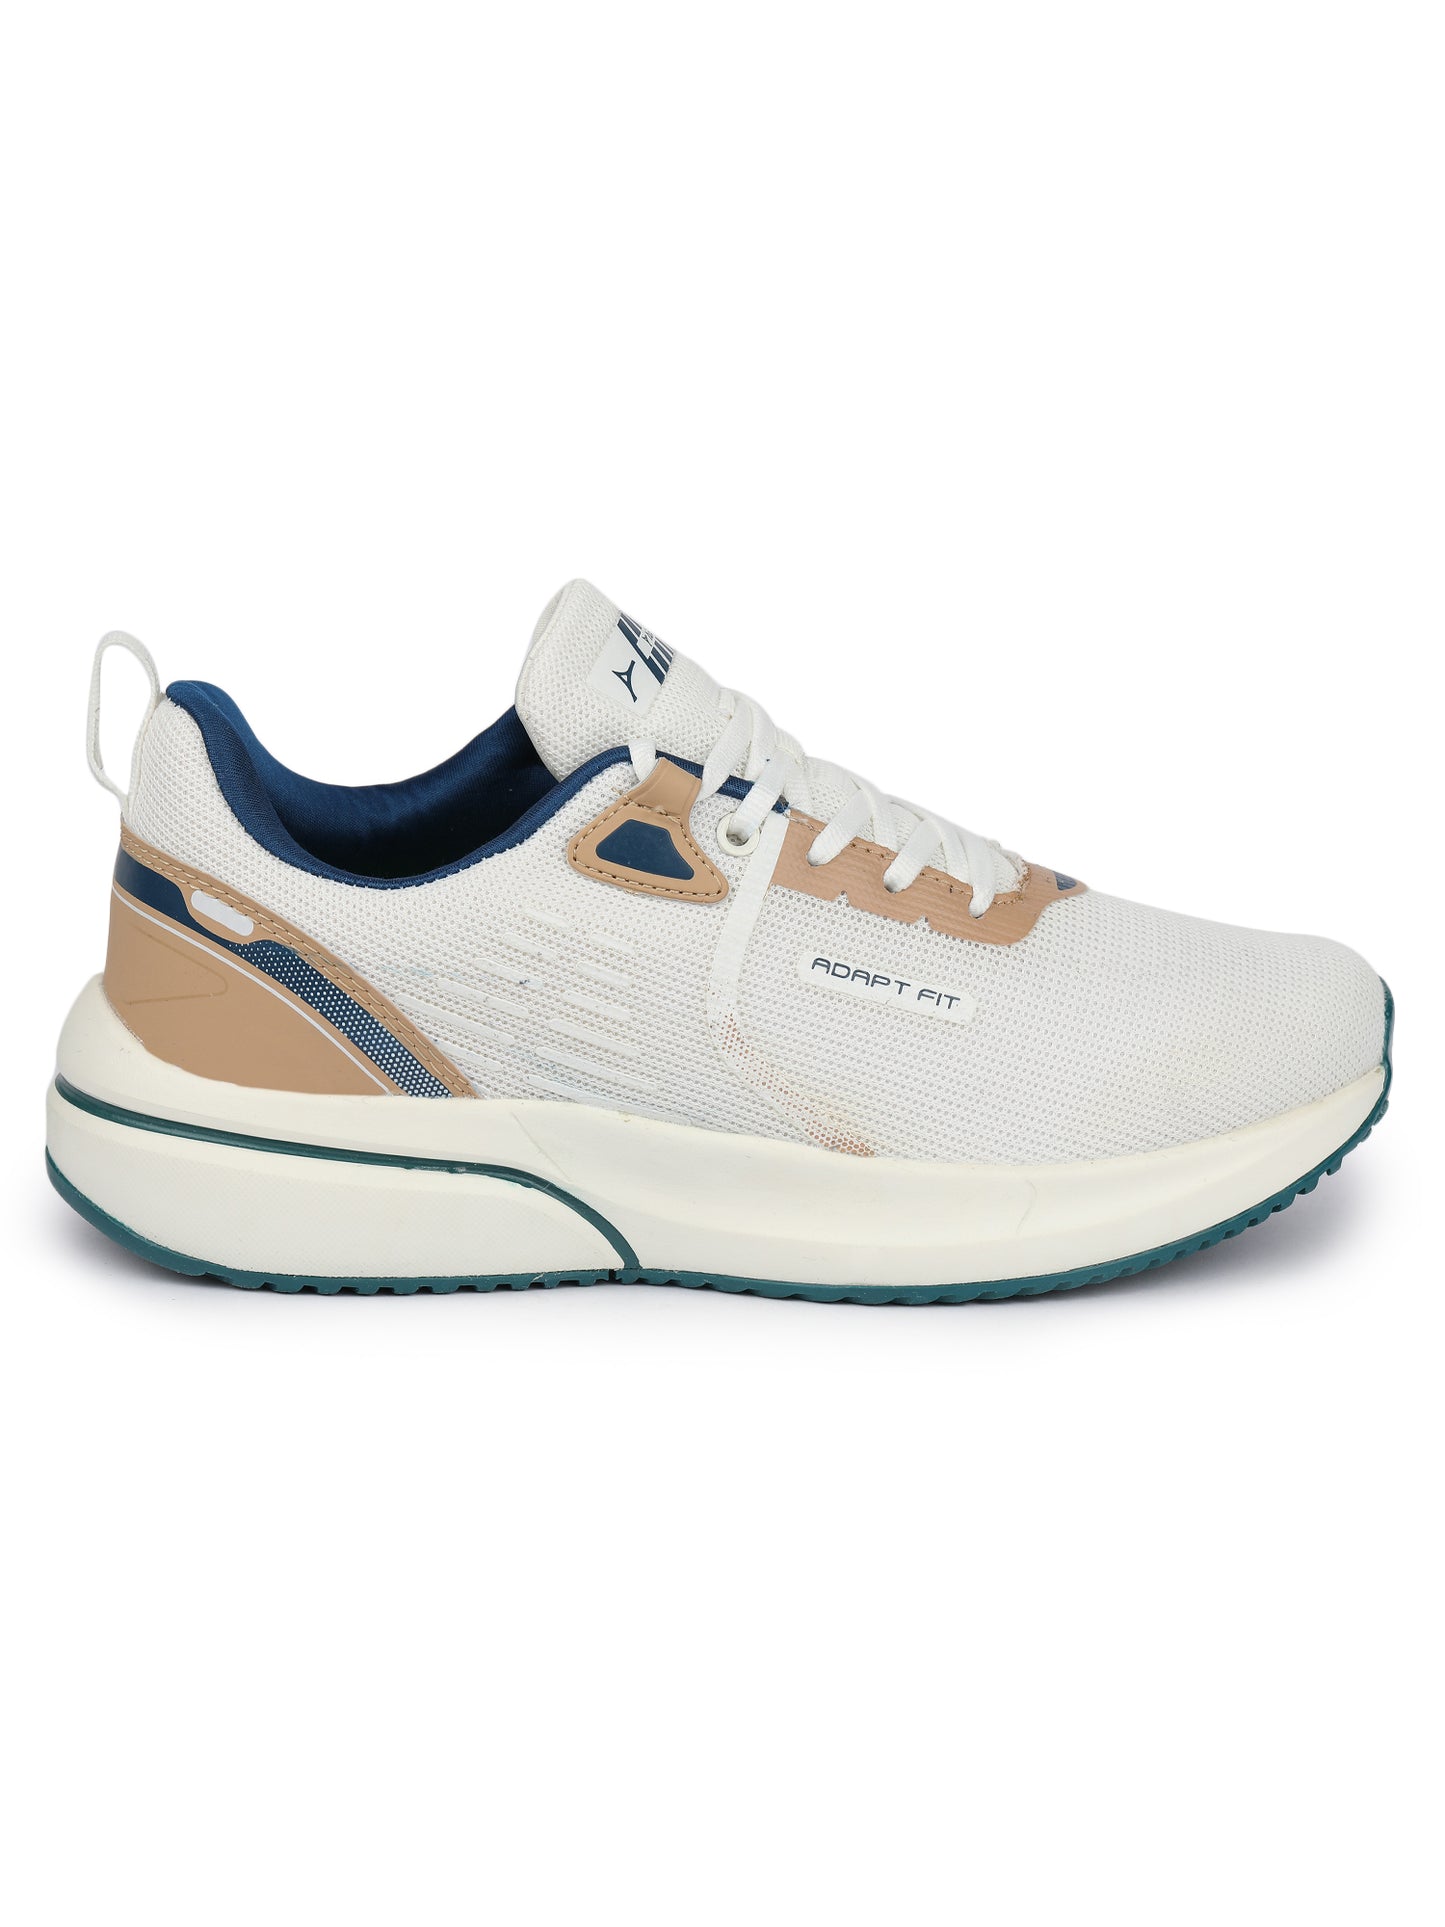 ABROS Ethan Sports Shoes For Men